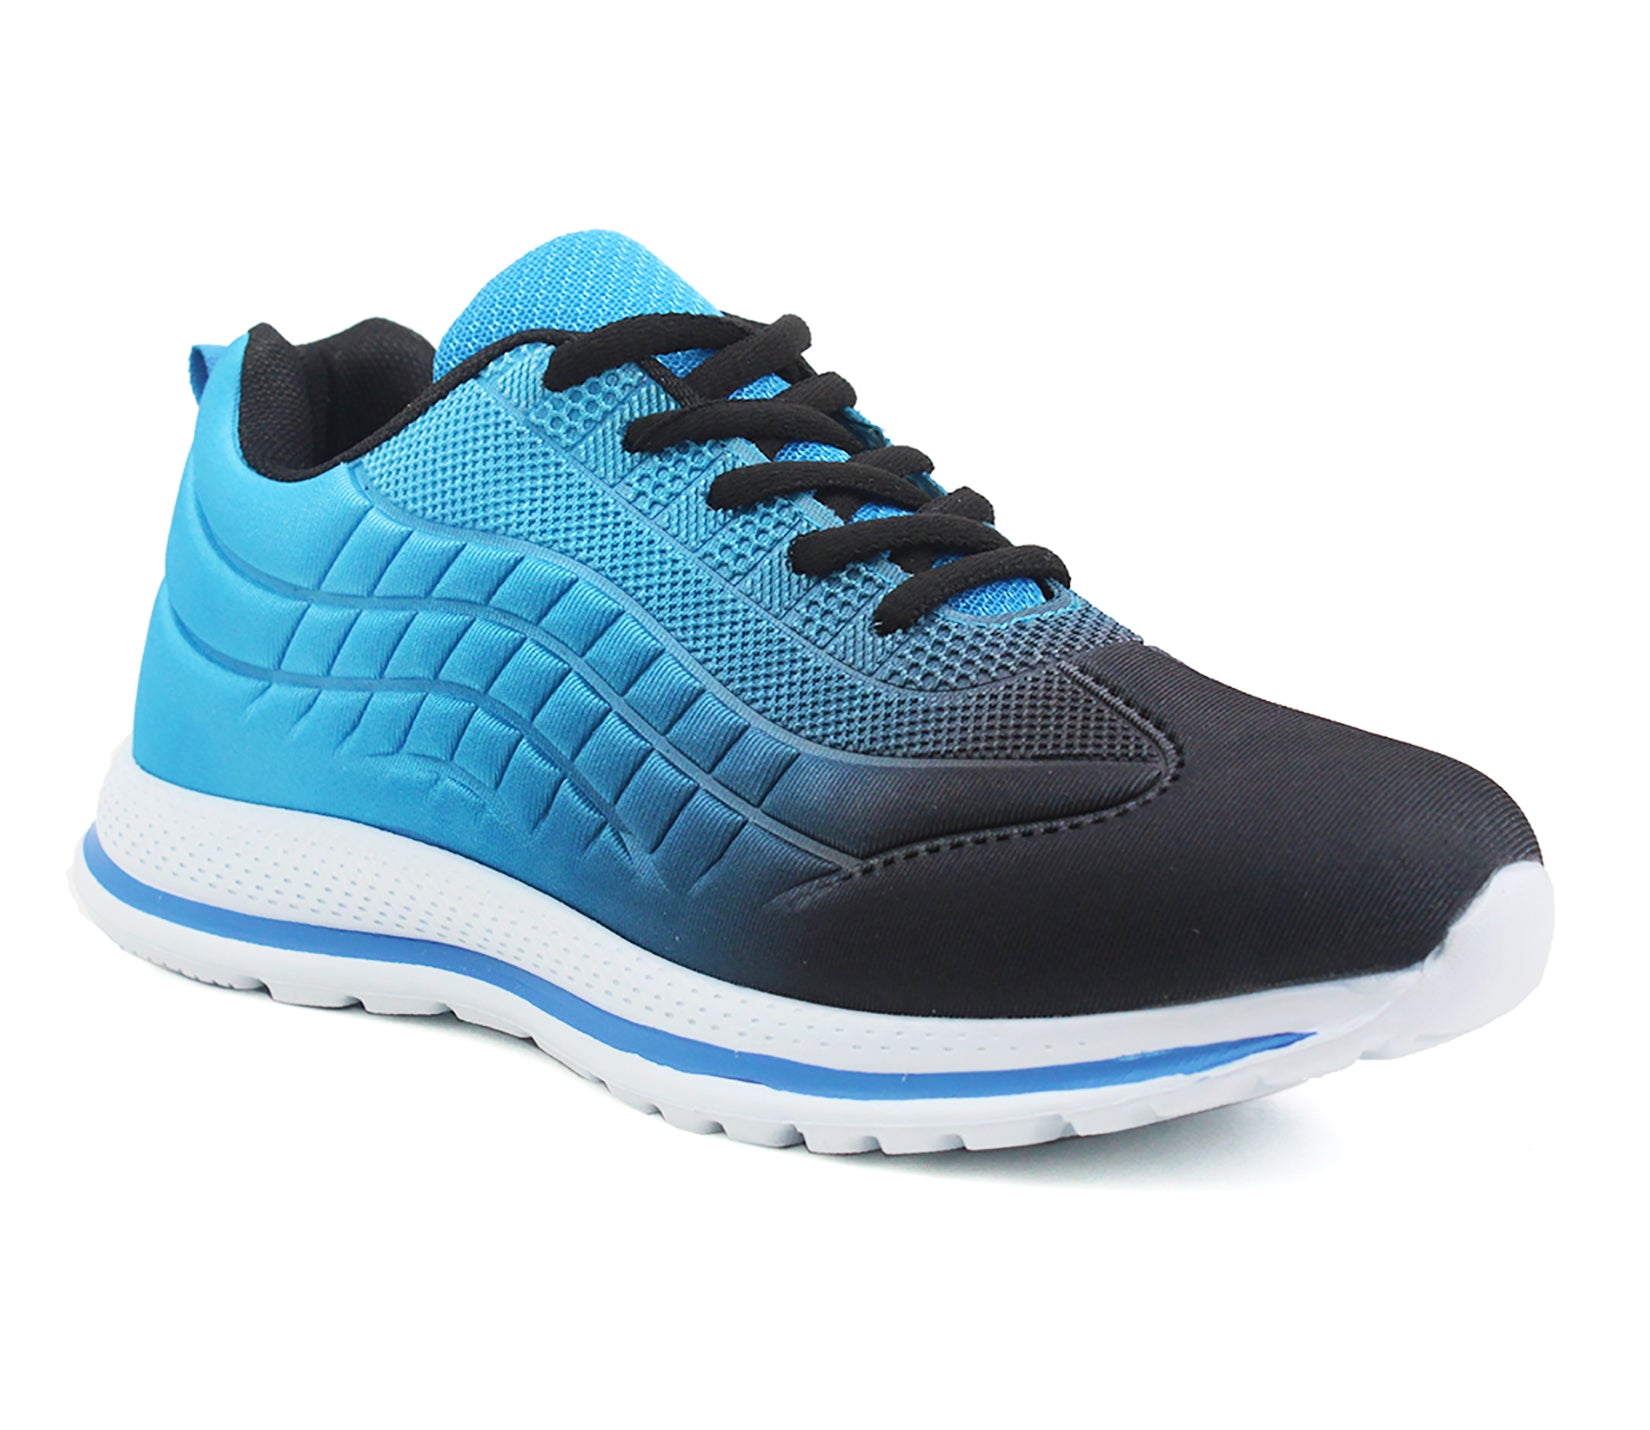 Wholesale Shoes China: Sourcing Top-Quality Footwear at Competitive Prices